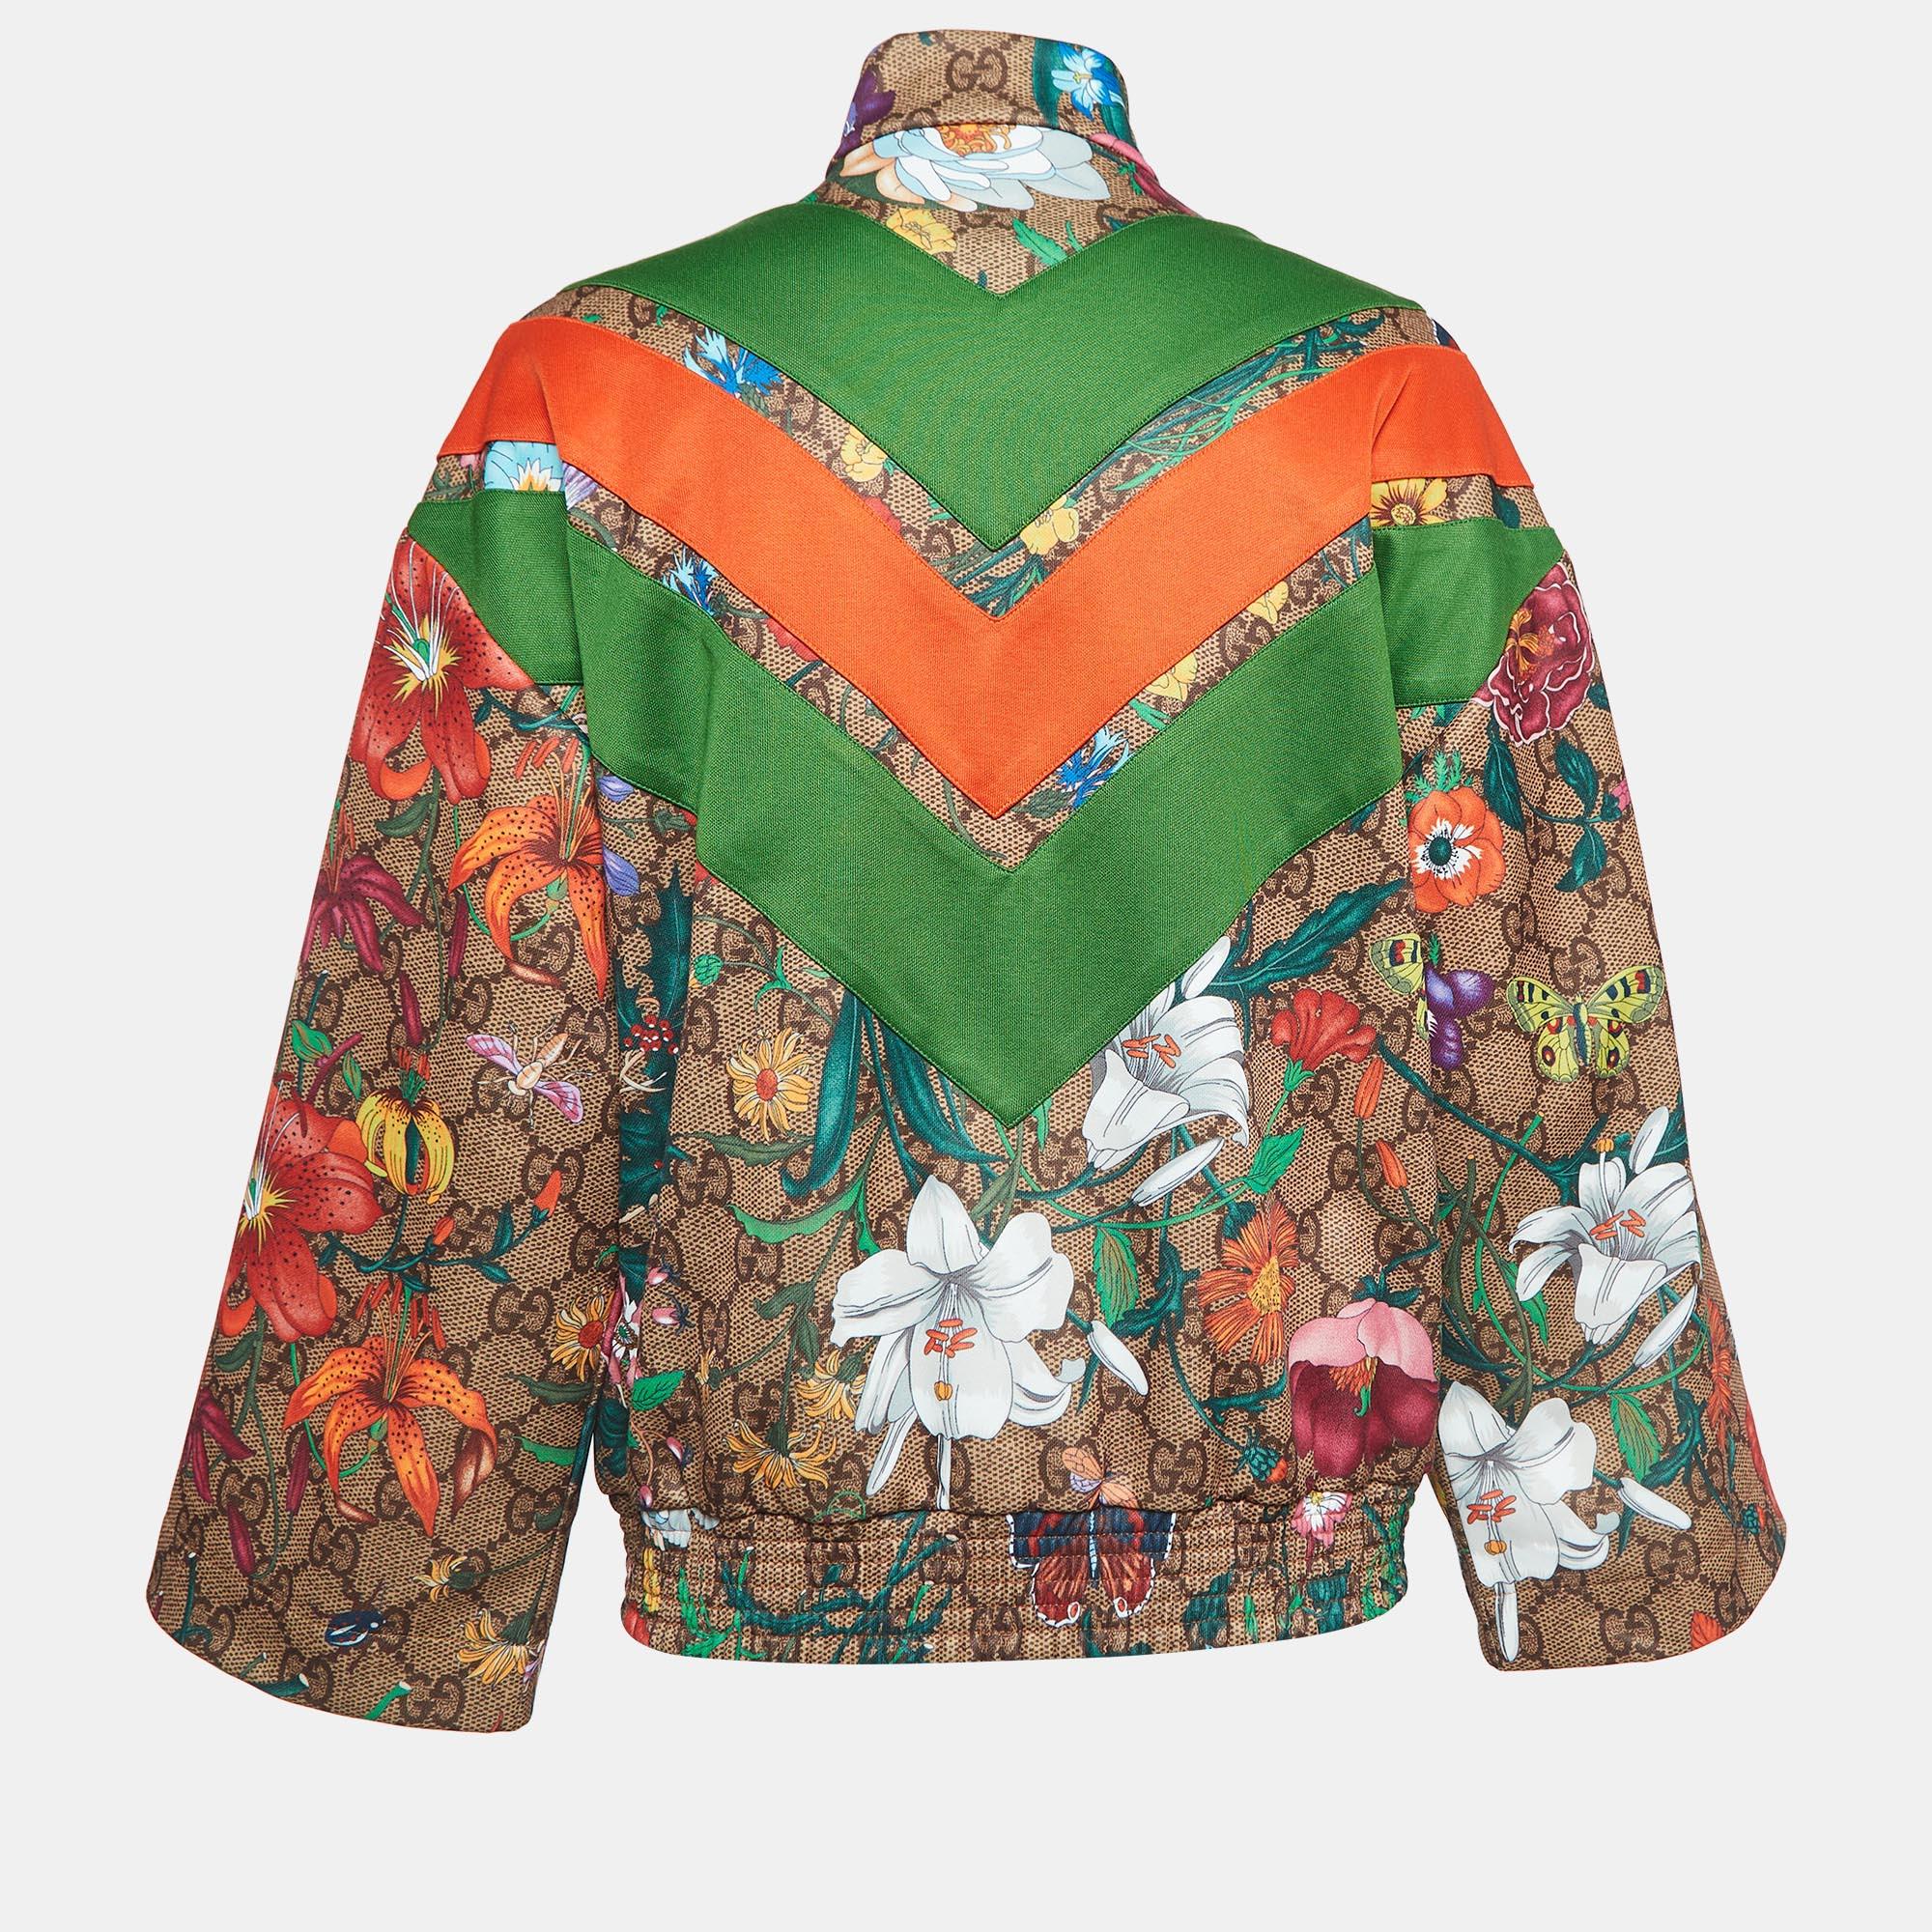 The Gucci jacket exudes vibrant charm with its iconic GG Supreme pattern adorned with lively florals. Crafted with meticulous attention to detail, it offers both style and comfort, perfect for adding a dash of luxury to your casual ensemble.

